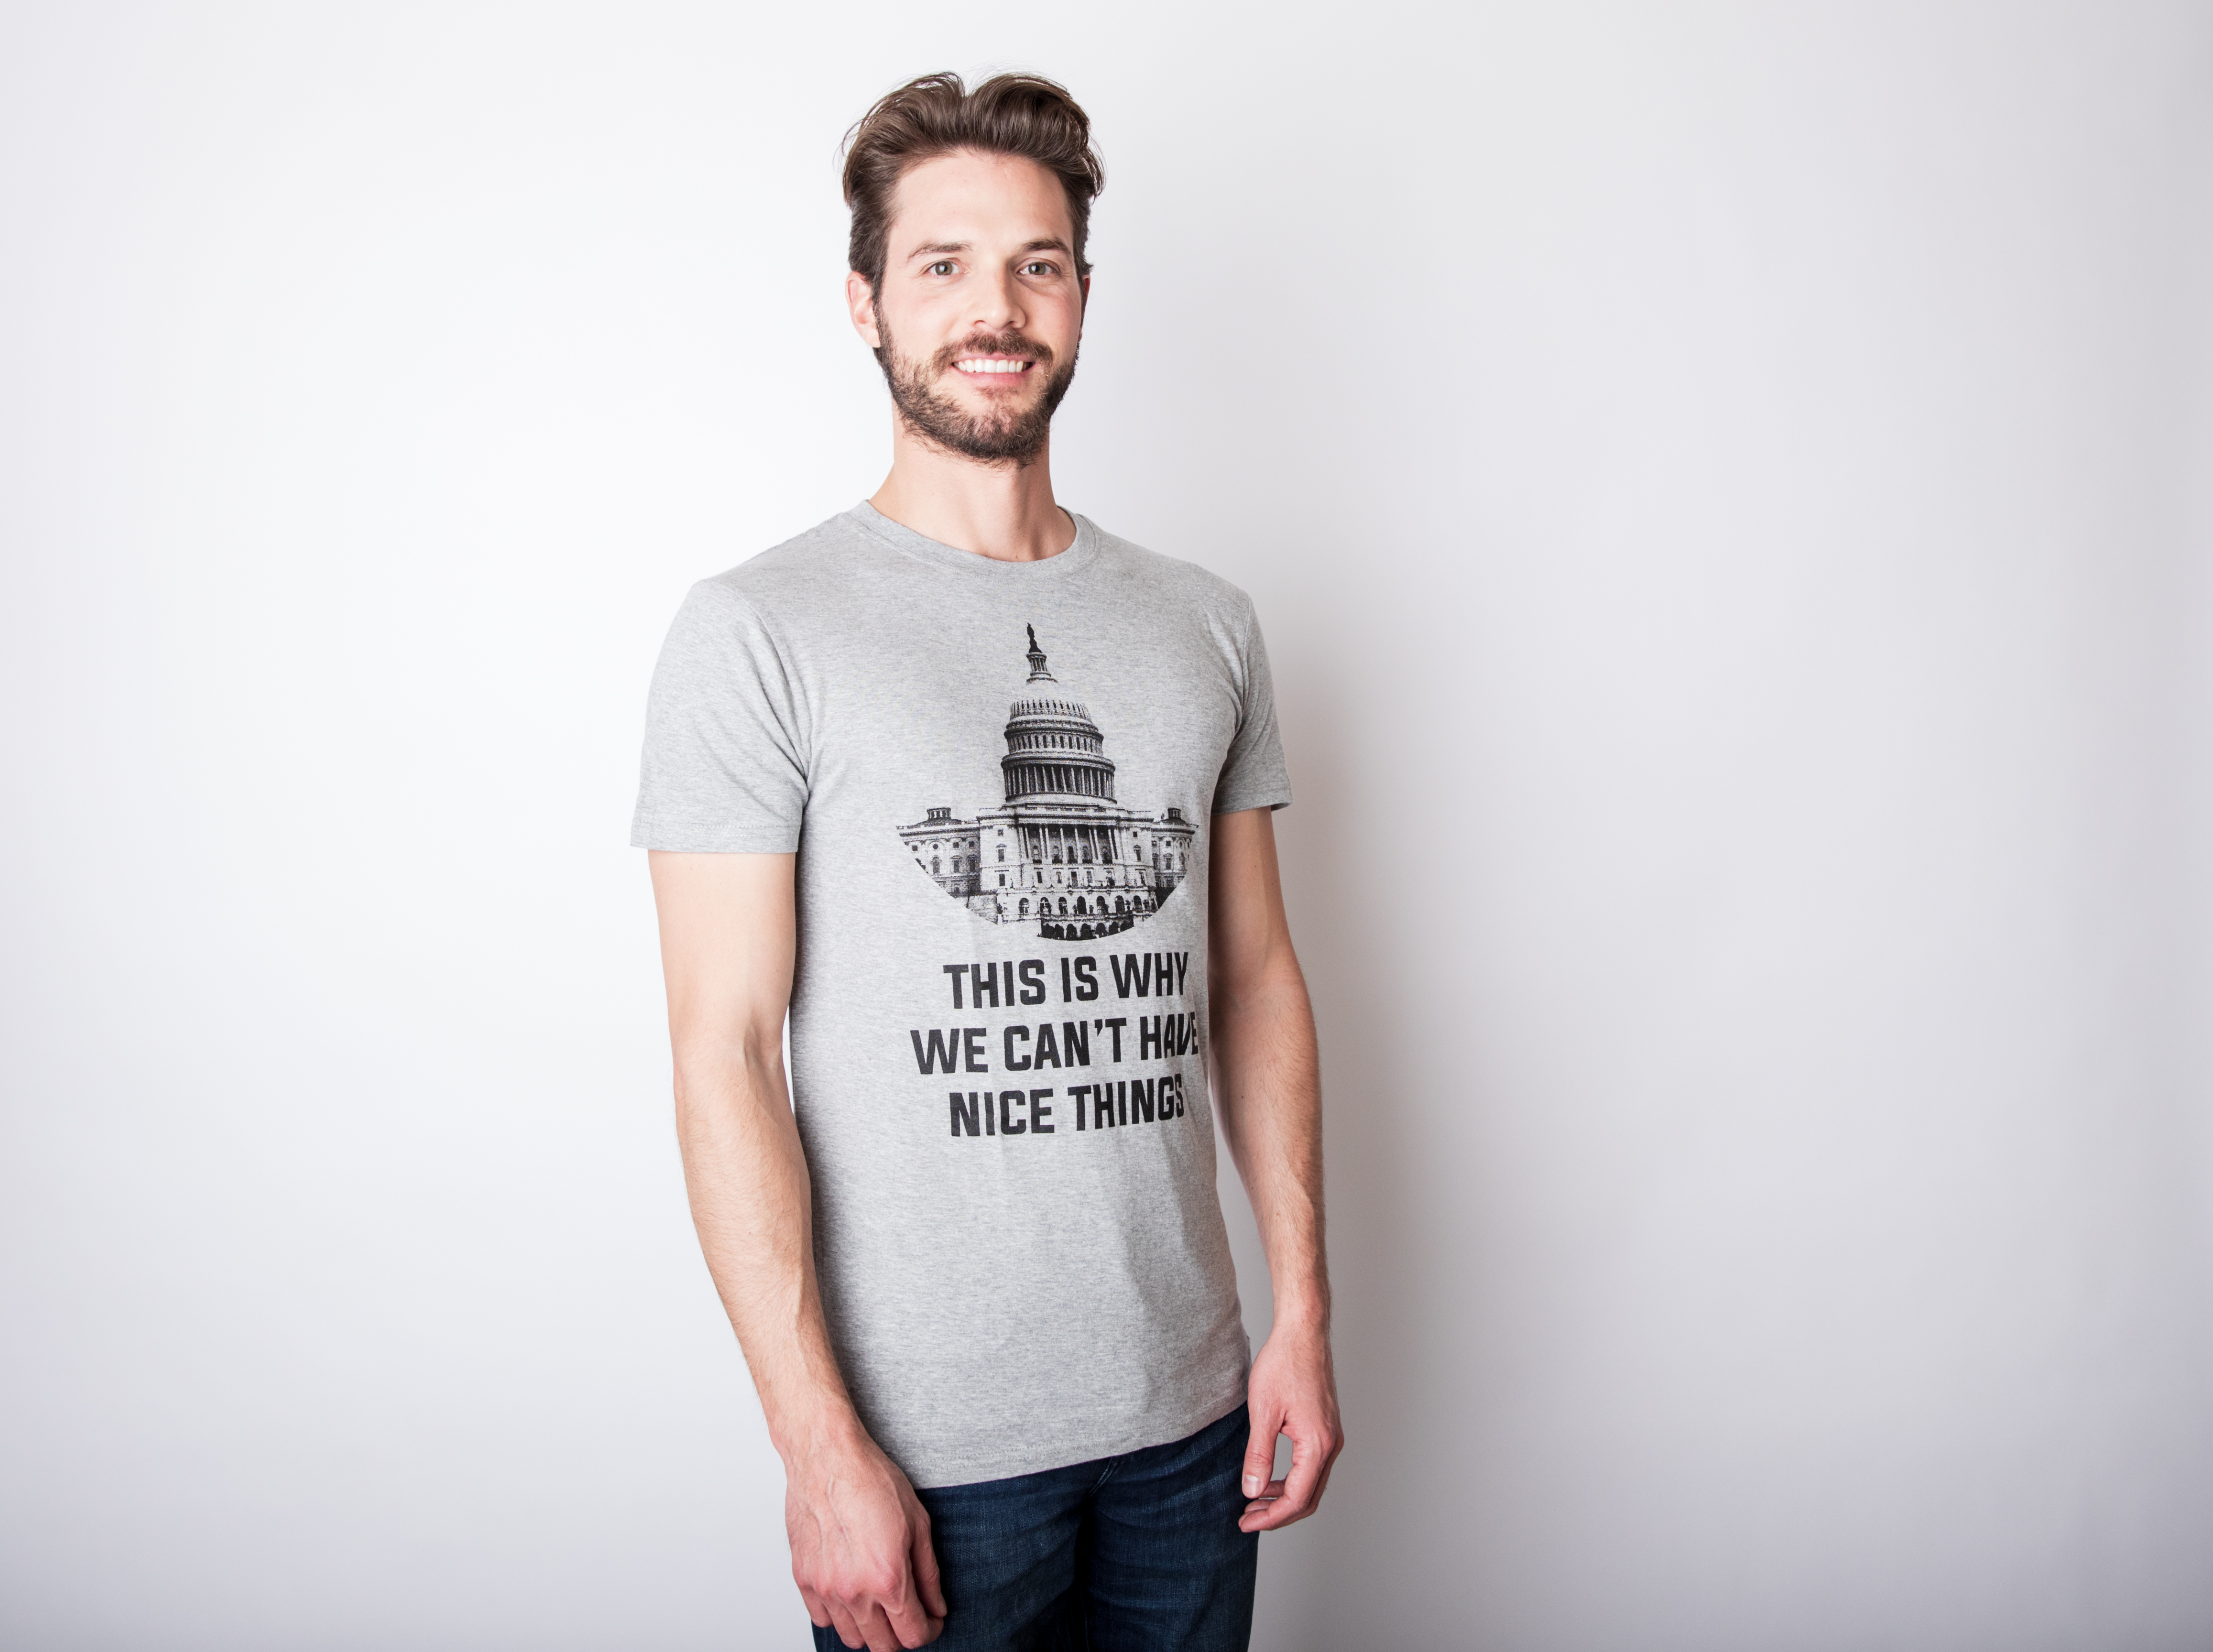 Crazy Dog Tshirts This Is Why We Can't Have Nice Things T Shirt Funny Anti Capitol Political Tee